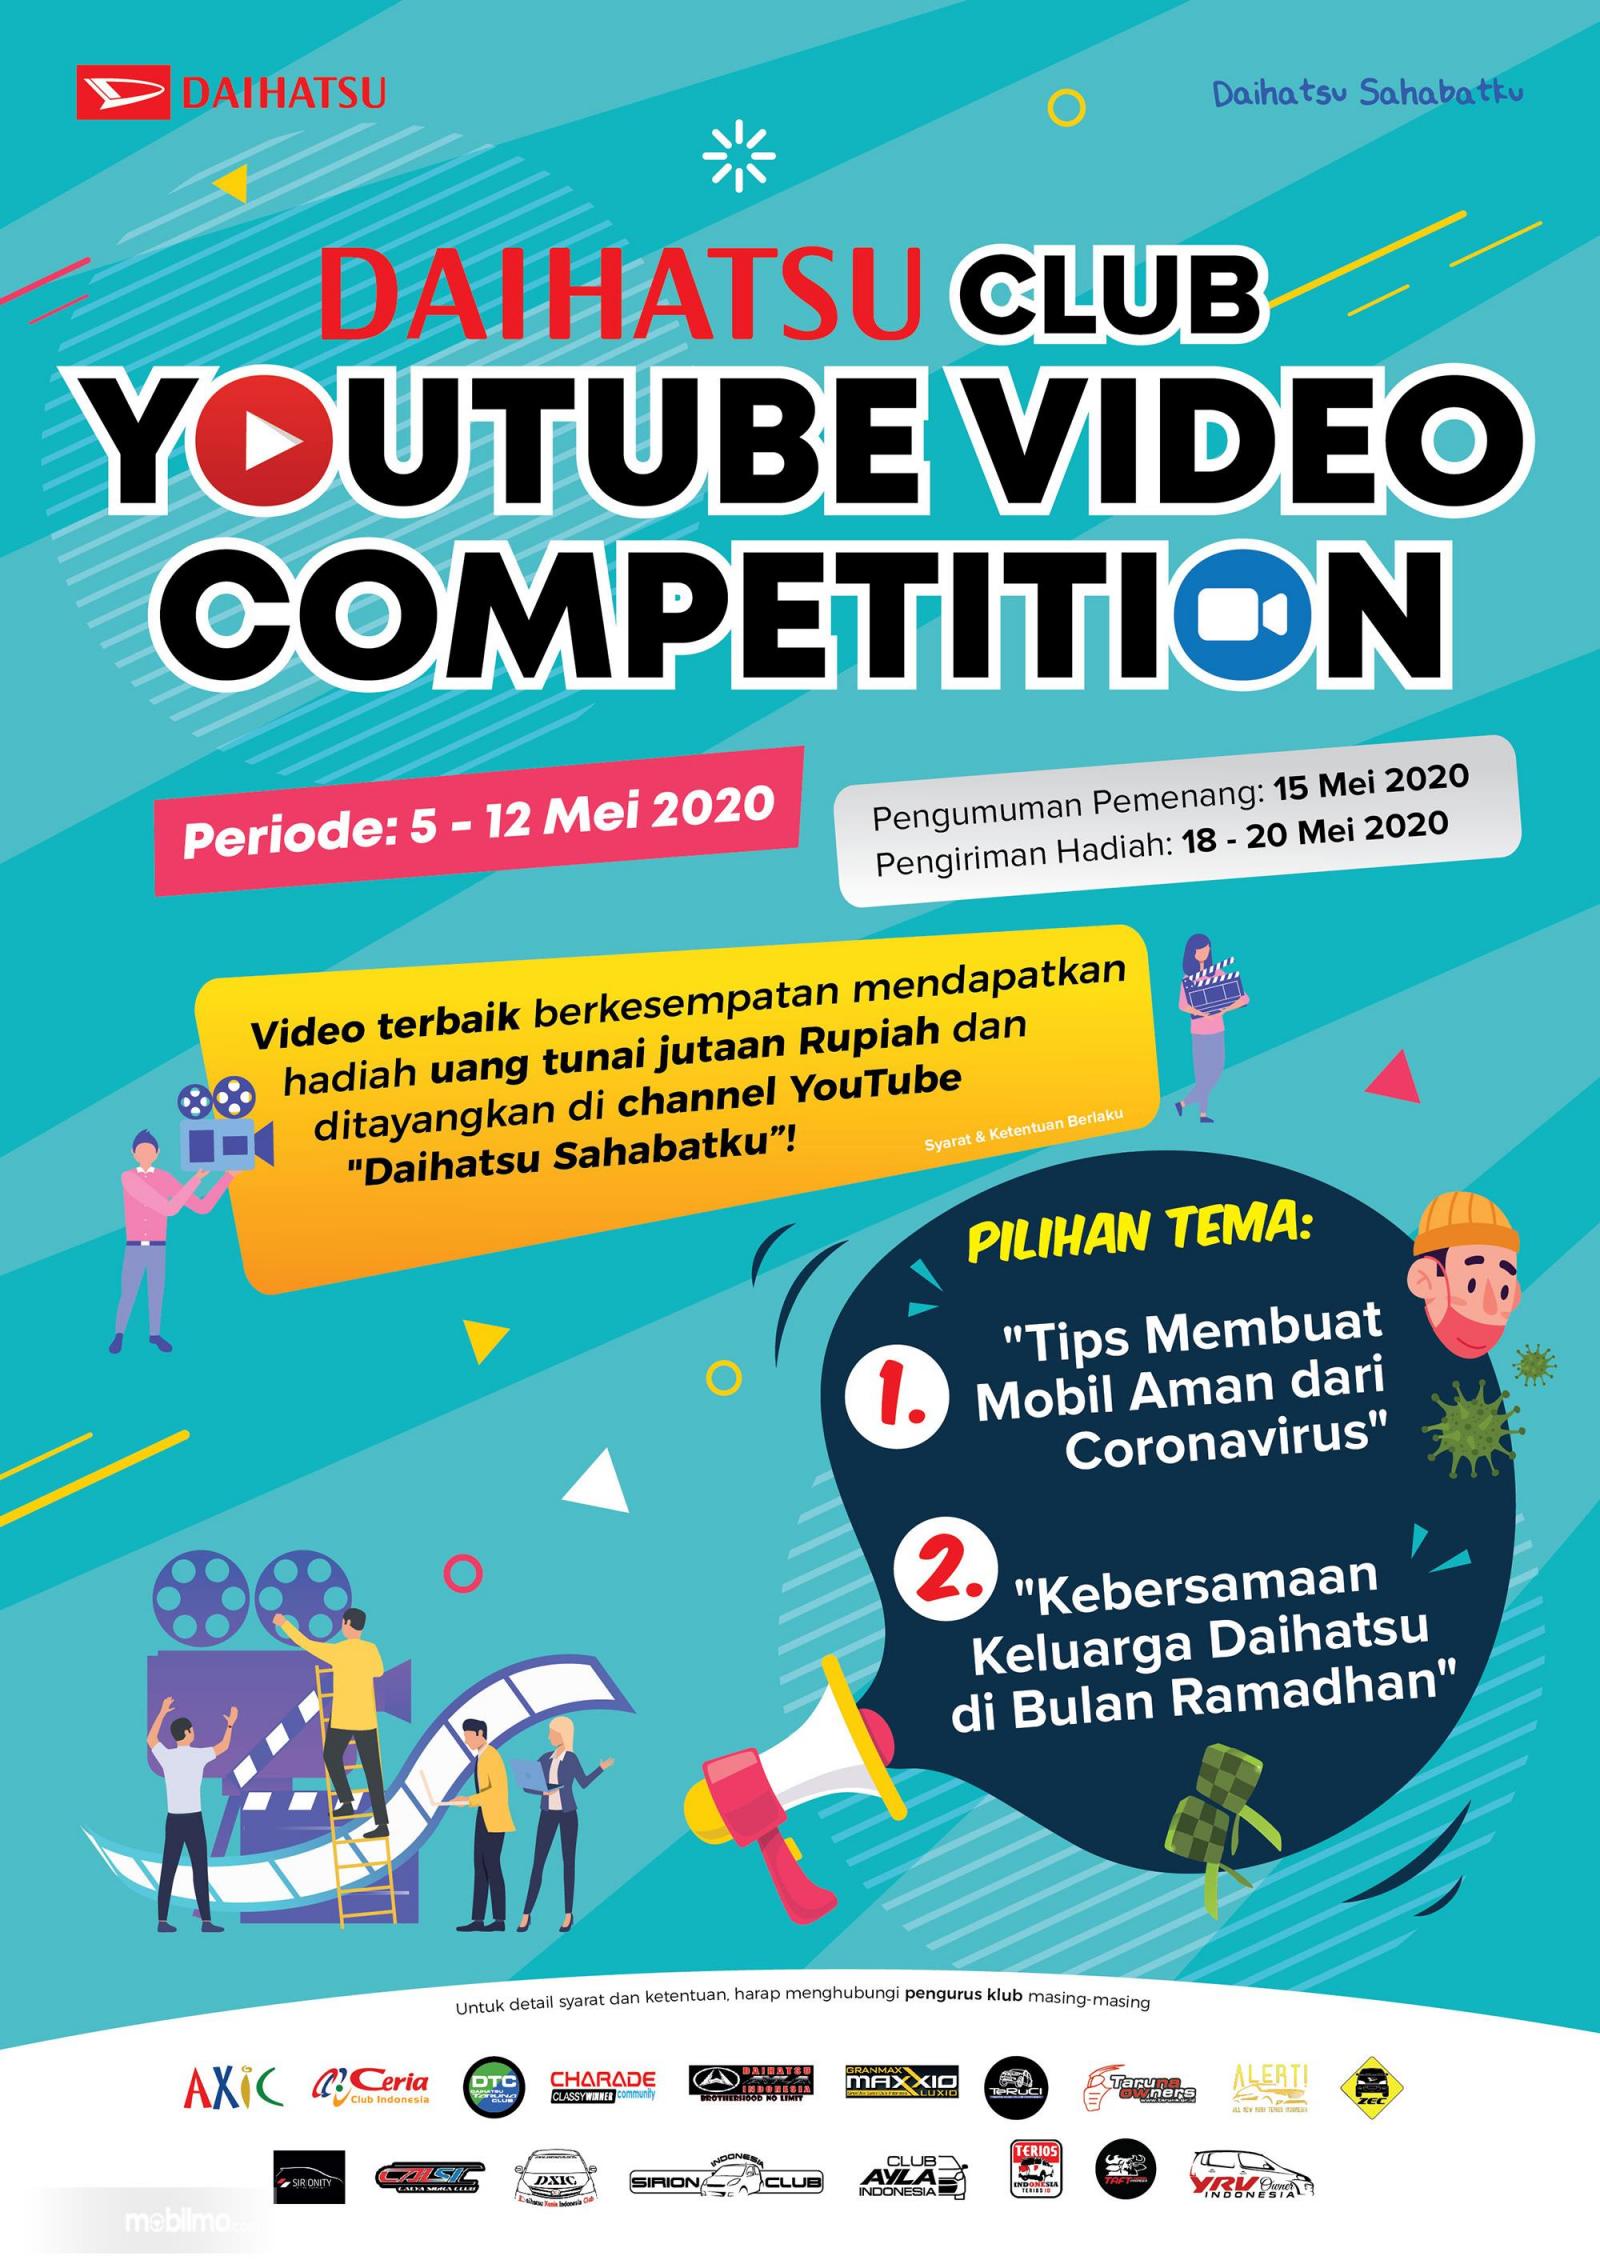 Foto menunjukkan banner Youtube Video Competition